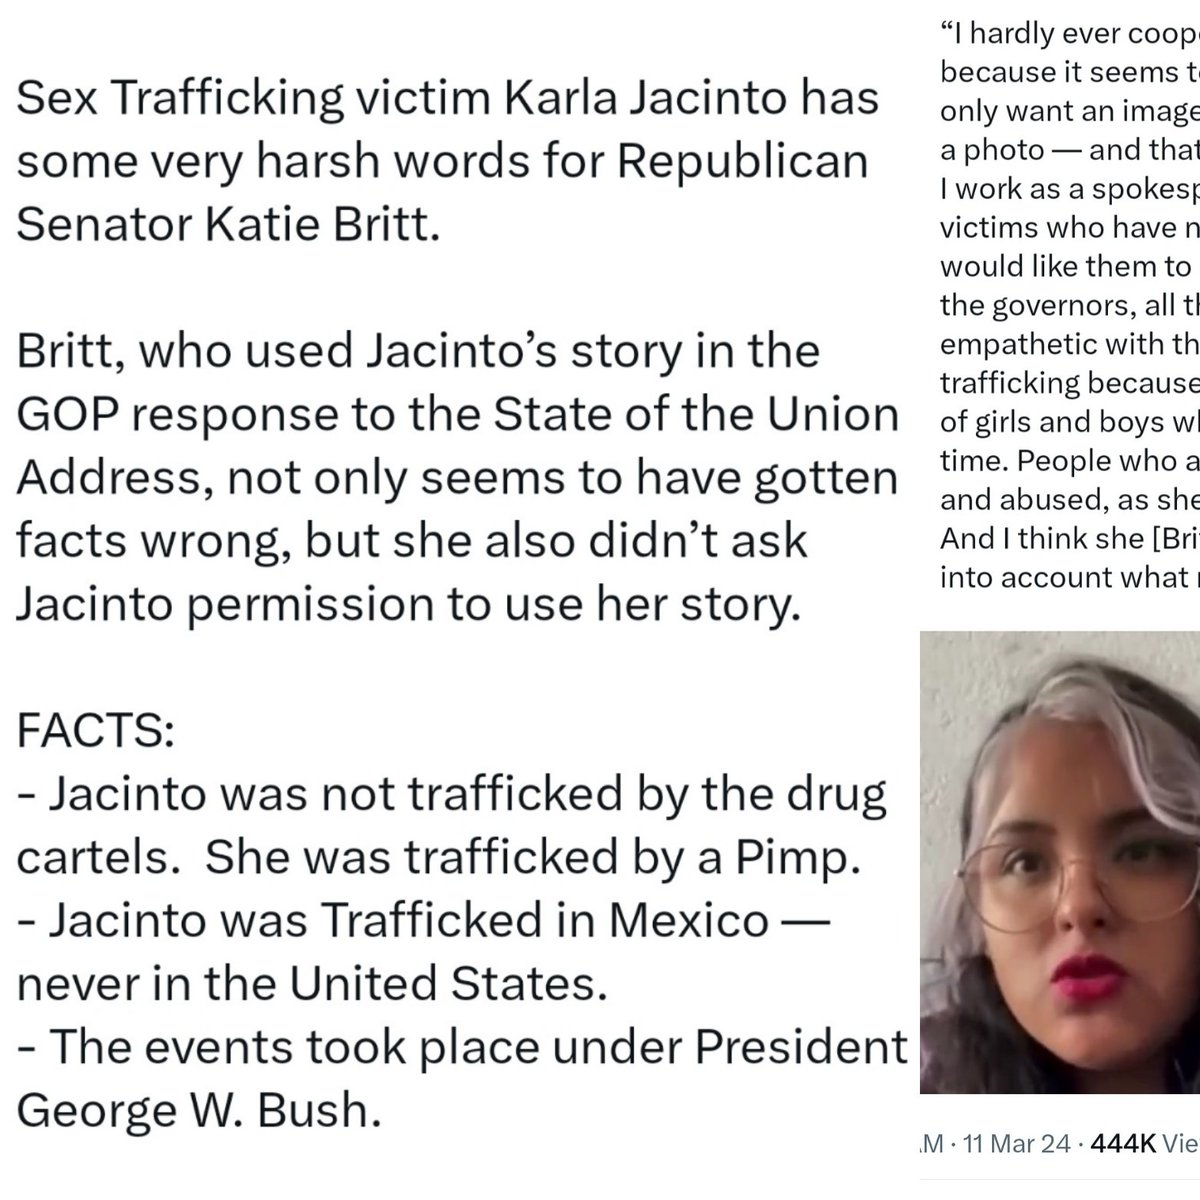 I am so glad she came forward to clarify how her story is being used for political purposes without her permission.  #humantraffickingawareness #labortrafficking #sextrafficking #politics